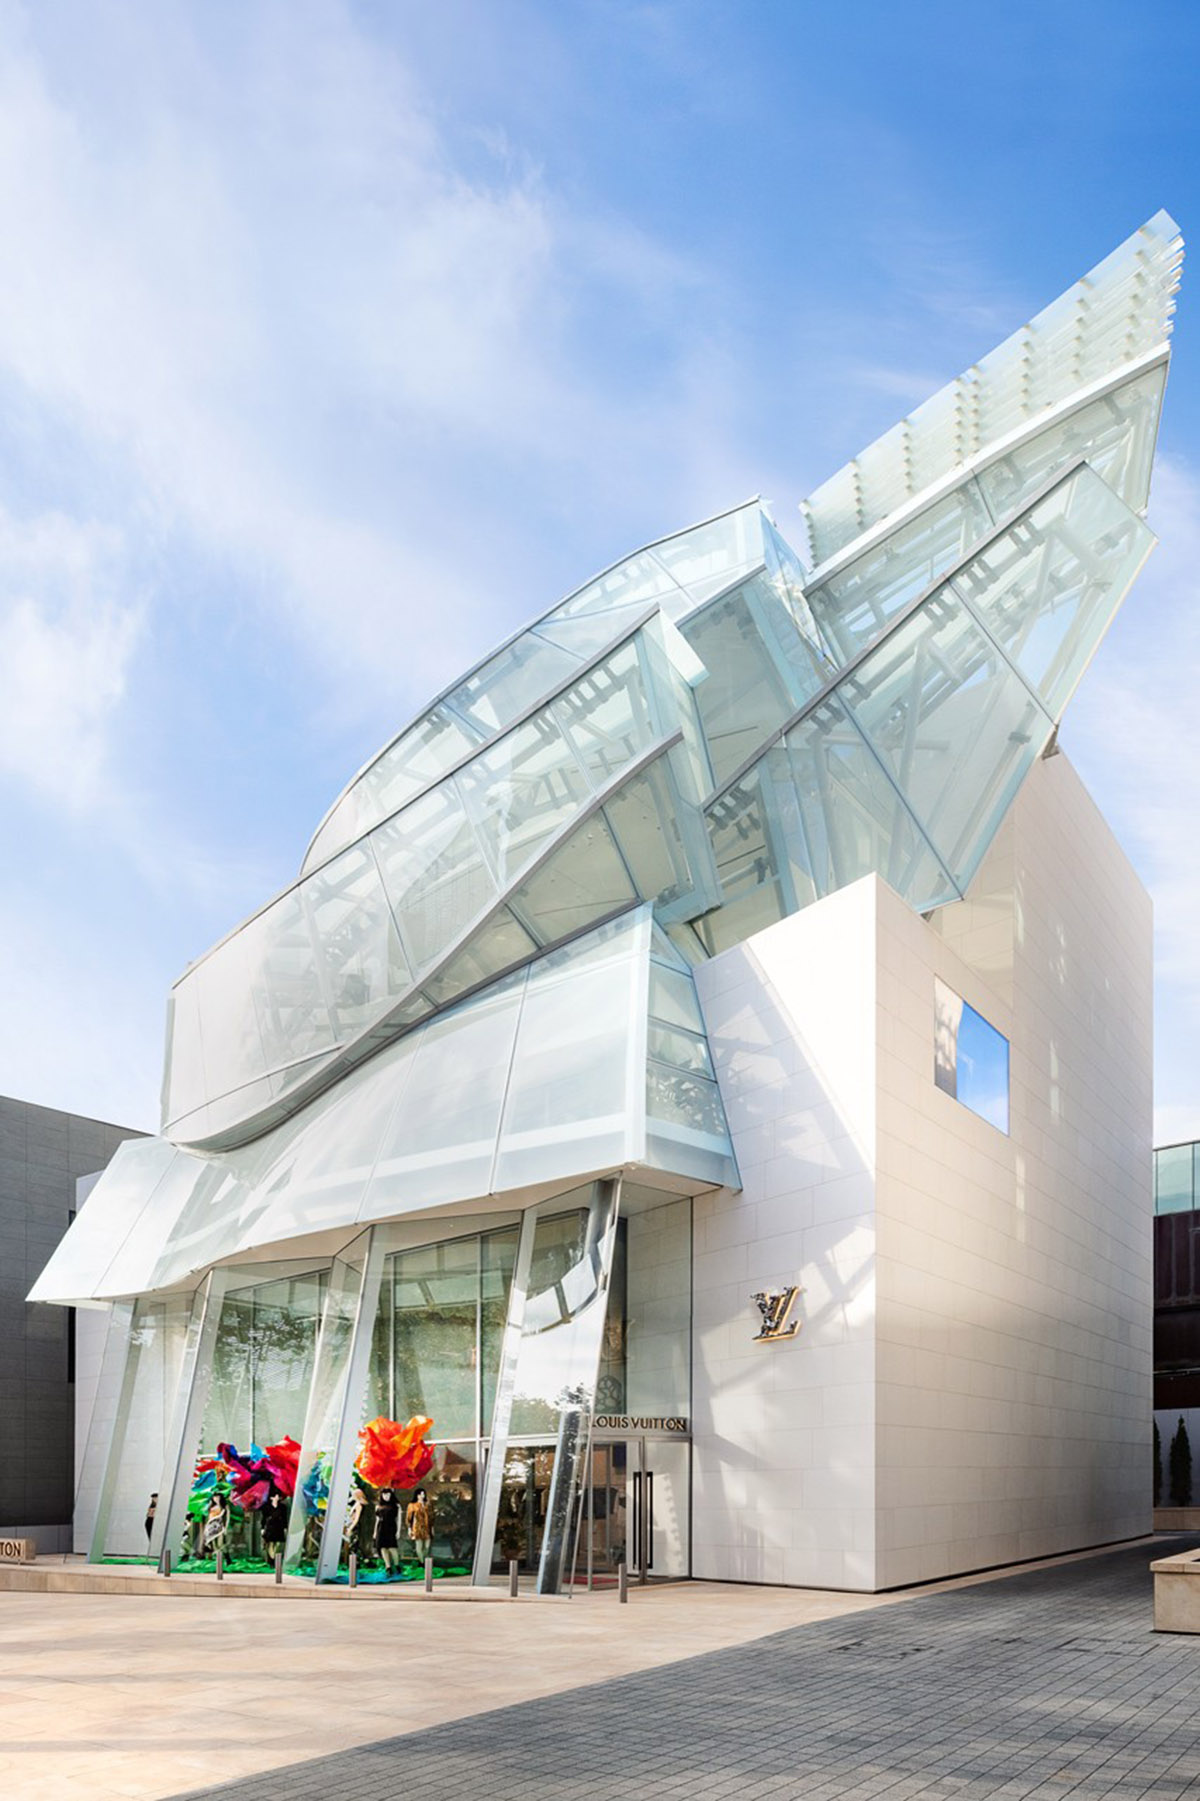 Frank Gehry designed Louis Vuitton's new Seoul store with fluffy glass  structure